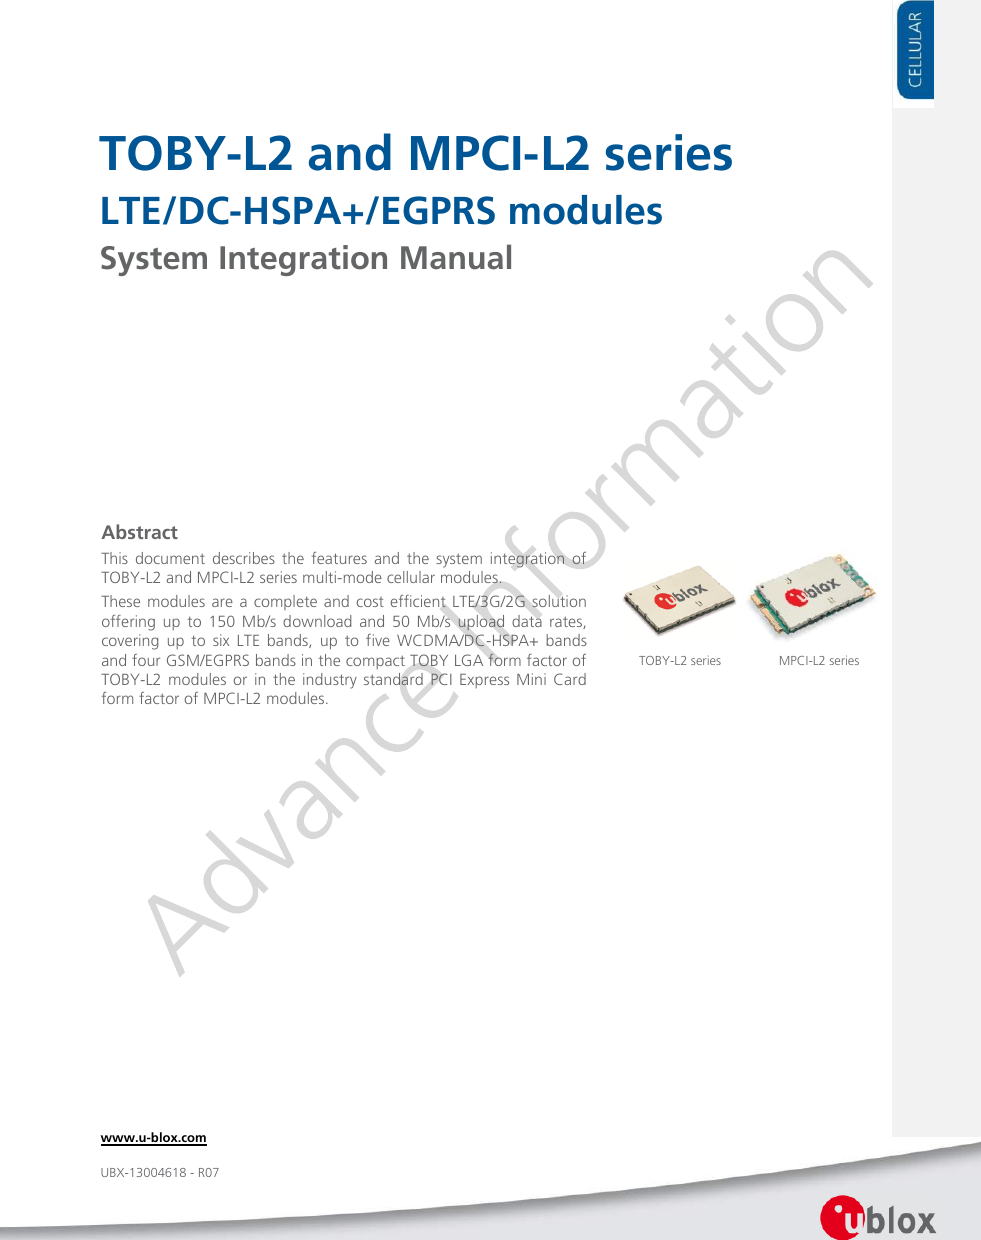     TOBY-L2 and MPCI-L2 series LTE/DC-HSPA+/EGPRS modules System Integration Manual               Abstract This  document  describes  the  features  and  the  system  integration  of TOBY-L2 and MPCI-L2 series multi-mode cellular modules. These modules are a complete and cost efficient LTE/3G/2G solution offering  up  to  150  Mb/s  download  and  50  Mb/s  upload  data  rates, covering  up  to  six  LTE  bands,  up  to  five  WCDMA/DC-HSPA+  bands and four GSM/EGPRS bands in the compact TOBY LGA form factor of TOBY-L2  modules  or  in  the industry  standard  PCI  Express  Mini  Card form factor of MPCI-L2 modules. TOBY-L2 series  www.u-blox.com UBX-13004618 - R07 MPCI-L2 series  